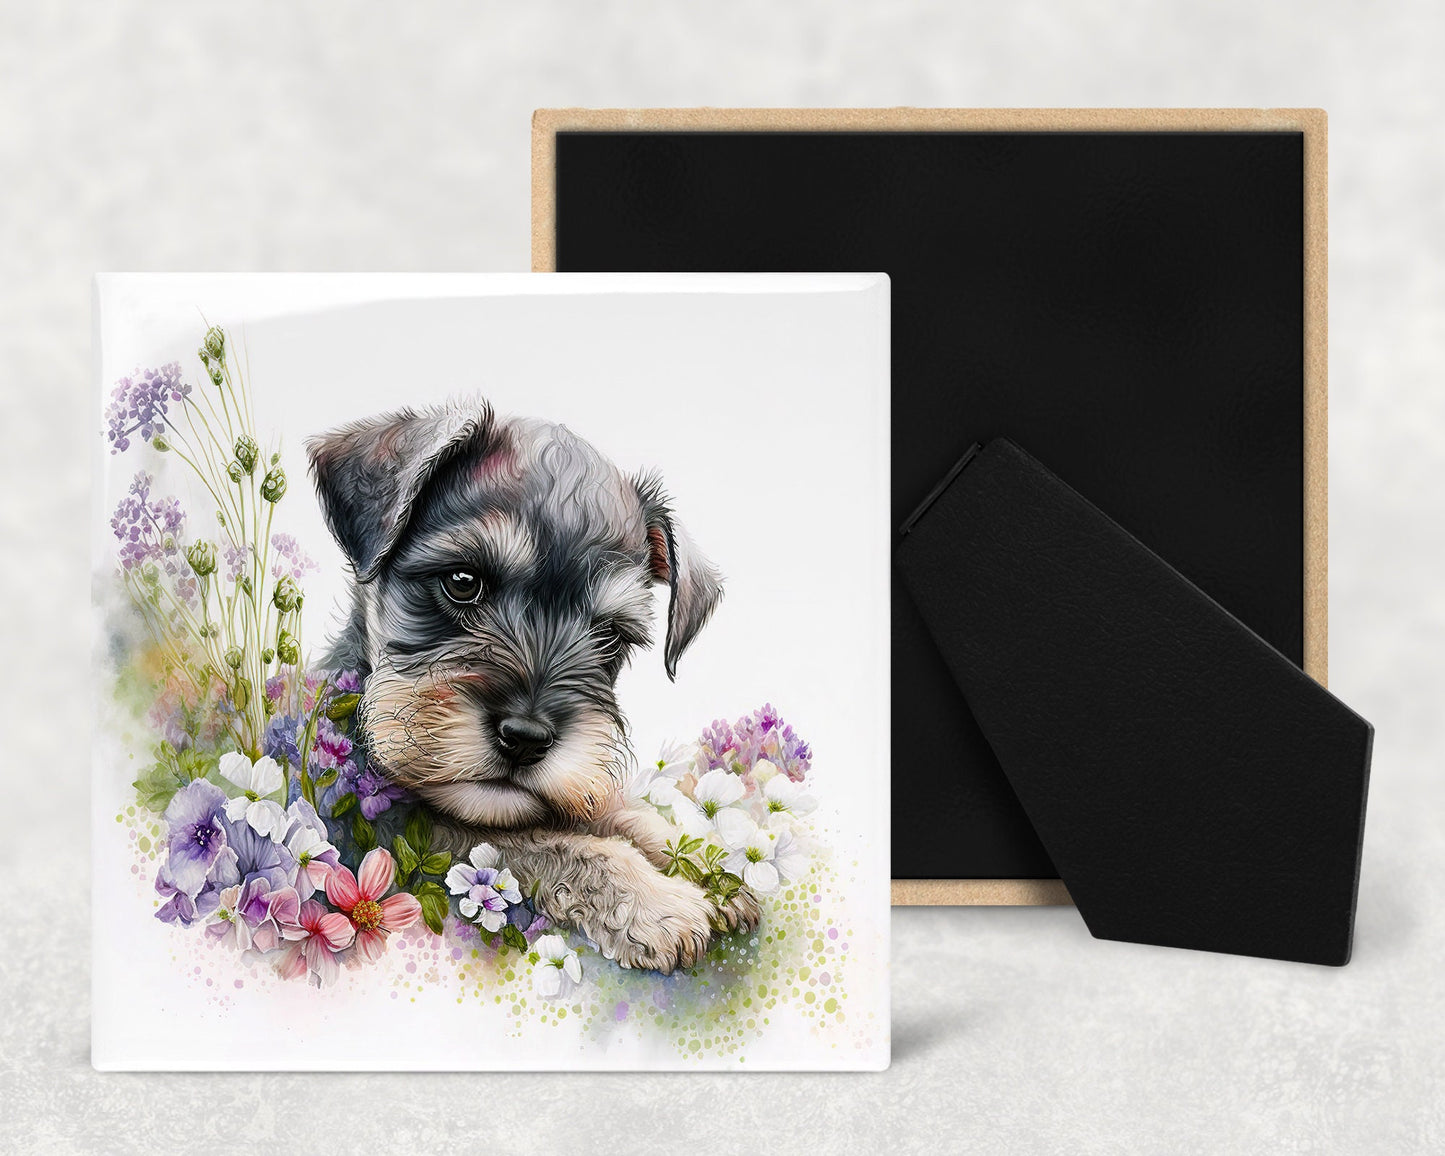 Cute Schnauzer Puppy Art Decorative Ceramic Tile Set with Optional Easel Back - Available in 4 sizes - Set of 4